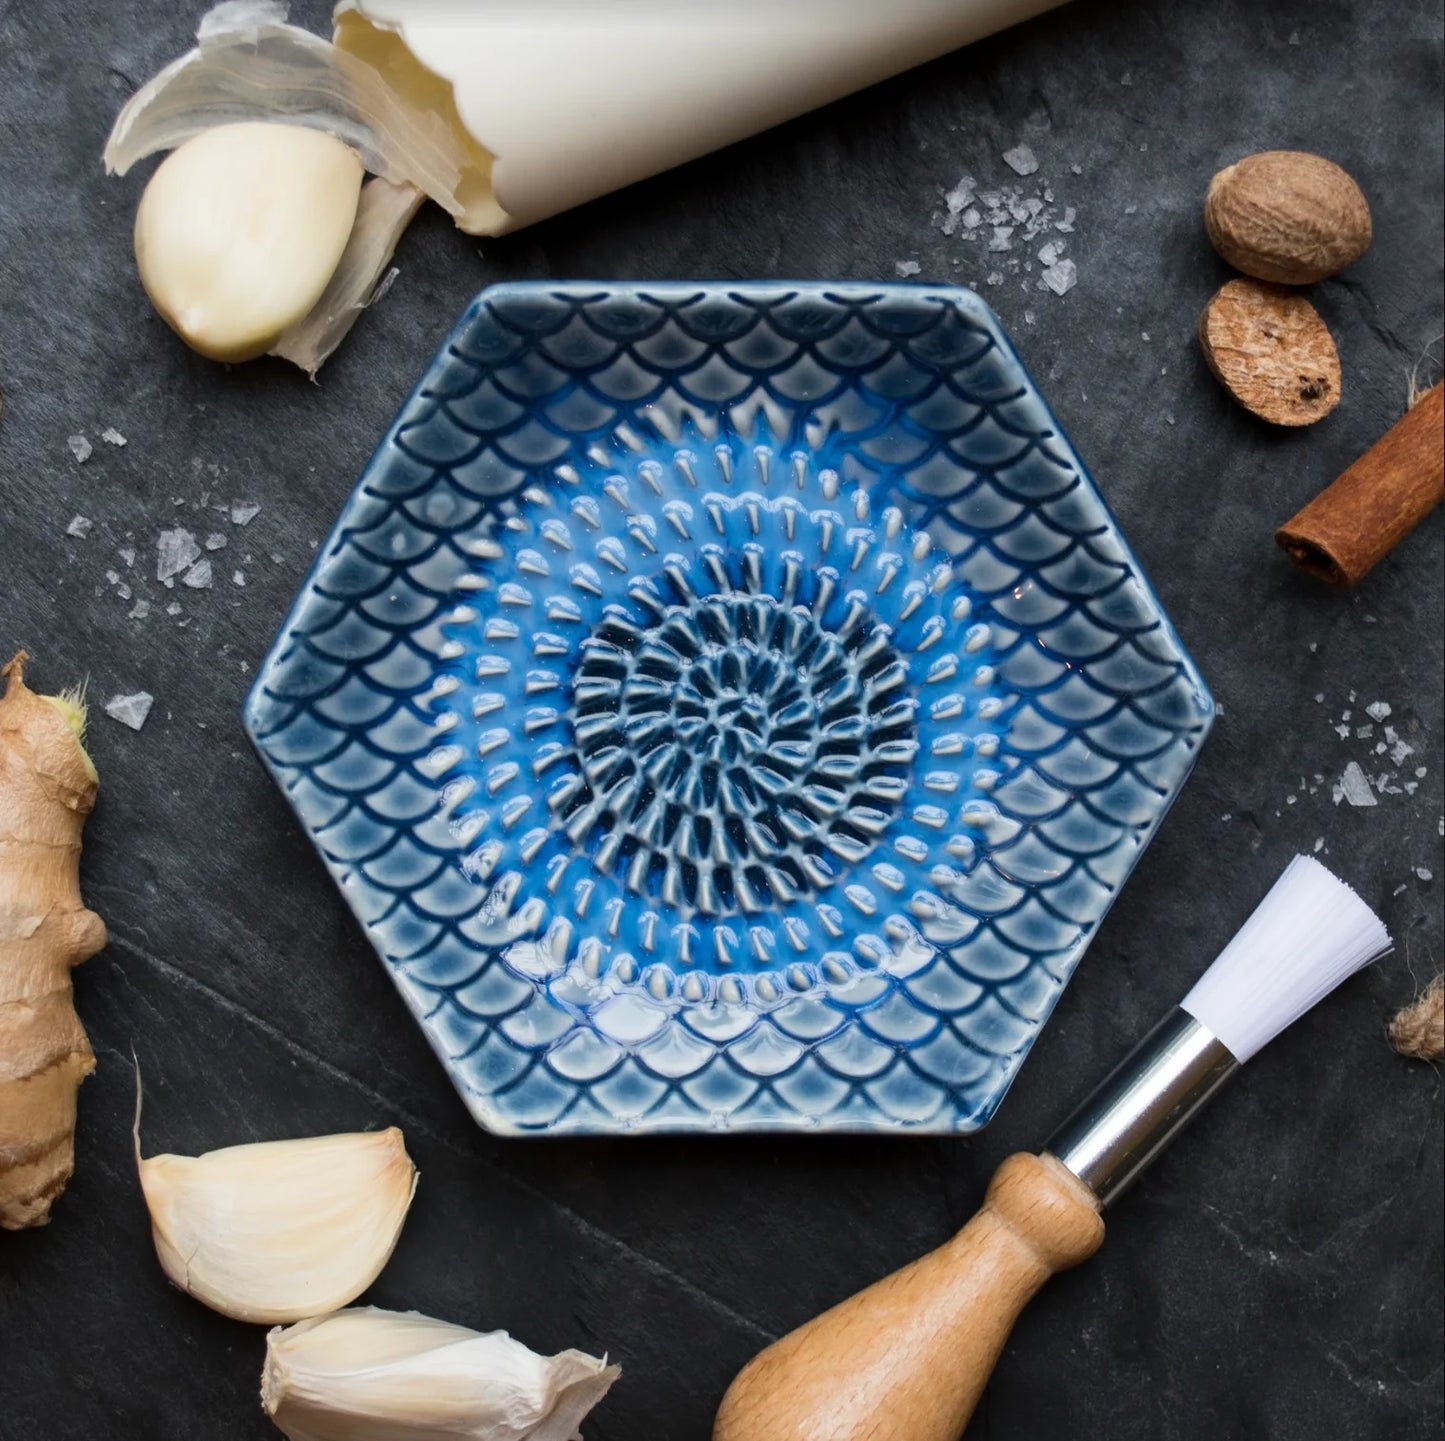 top view of a black countertop arranged with the blue tie dye grate plate, silicone garlic peeler, brush, and a variety of spices and roots.